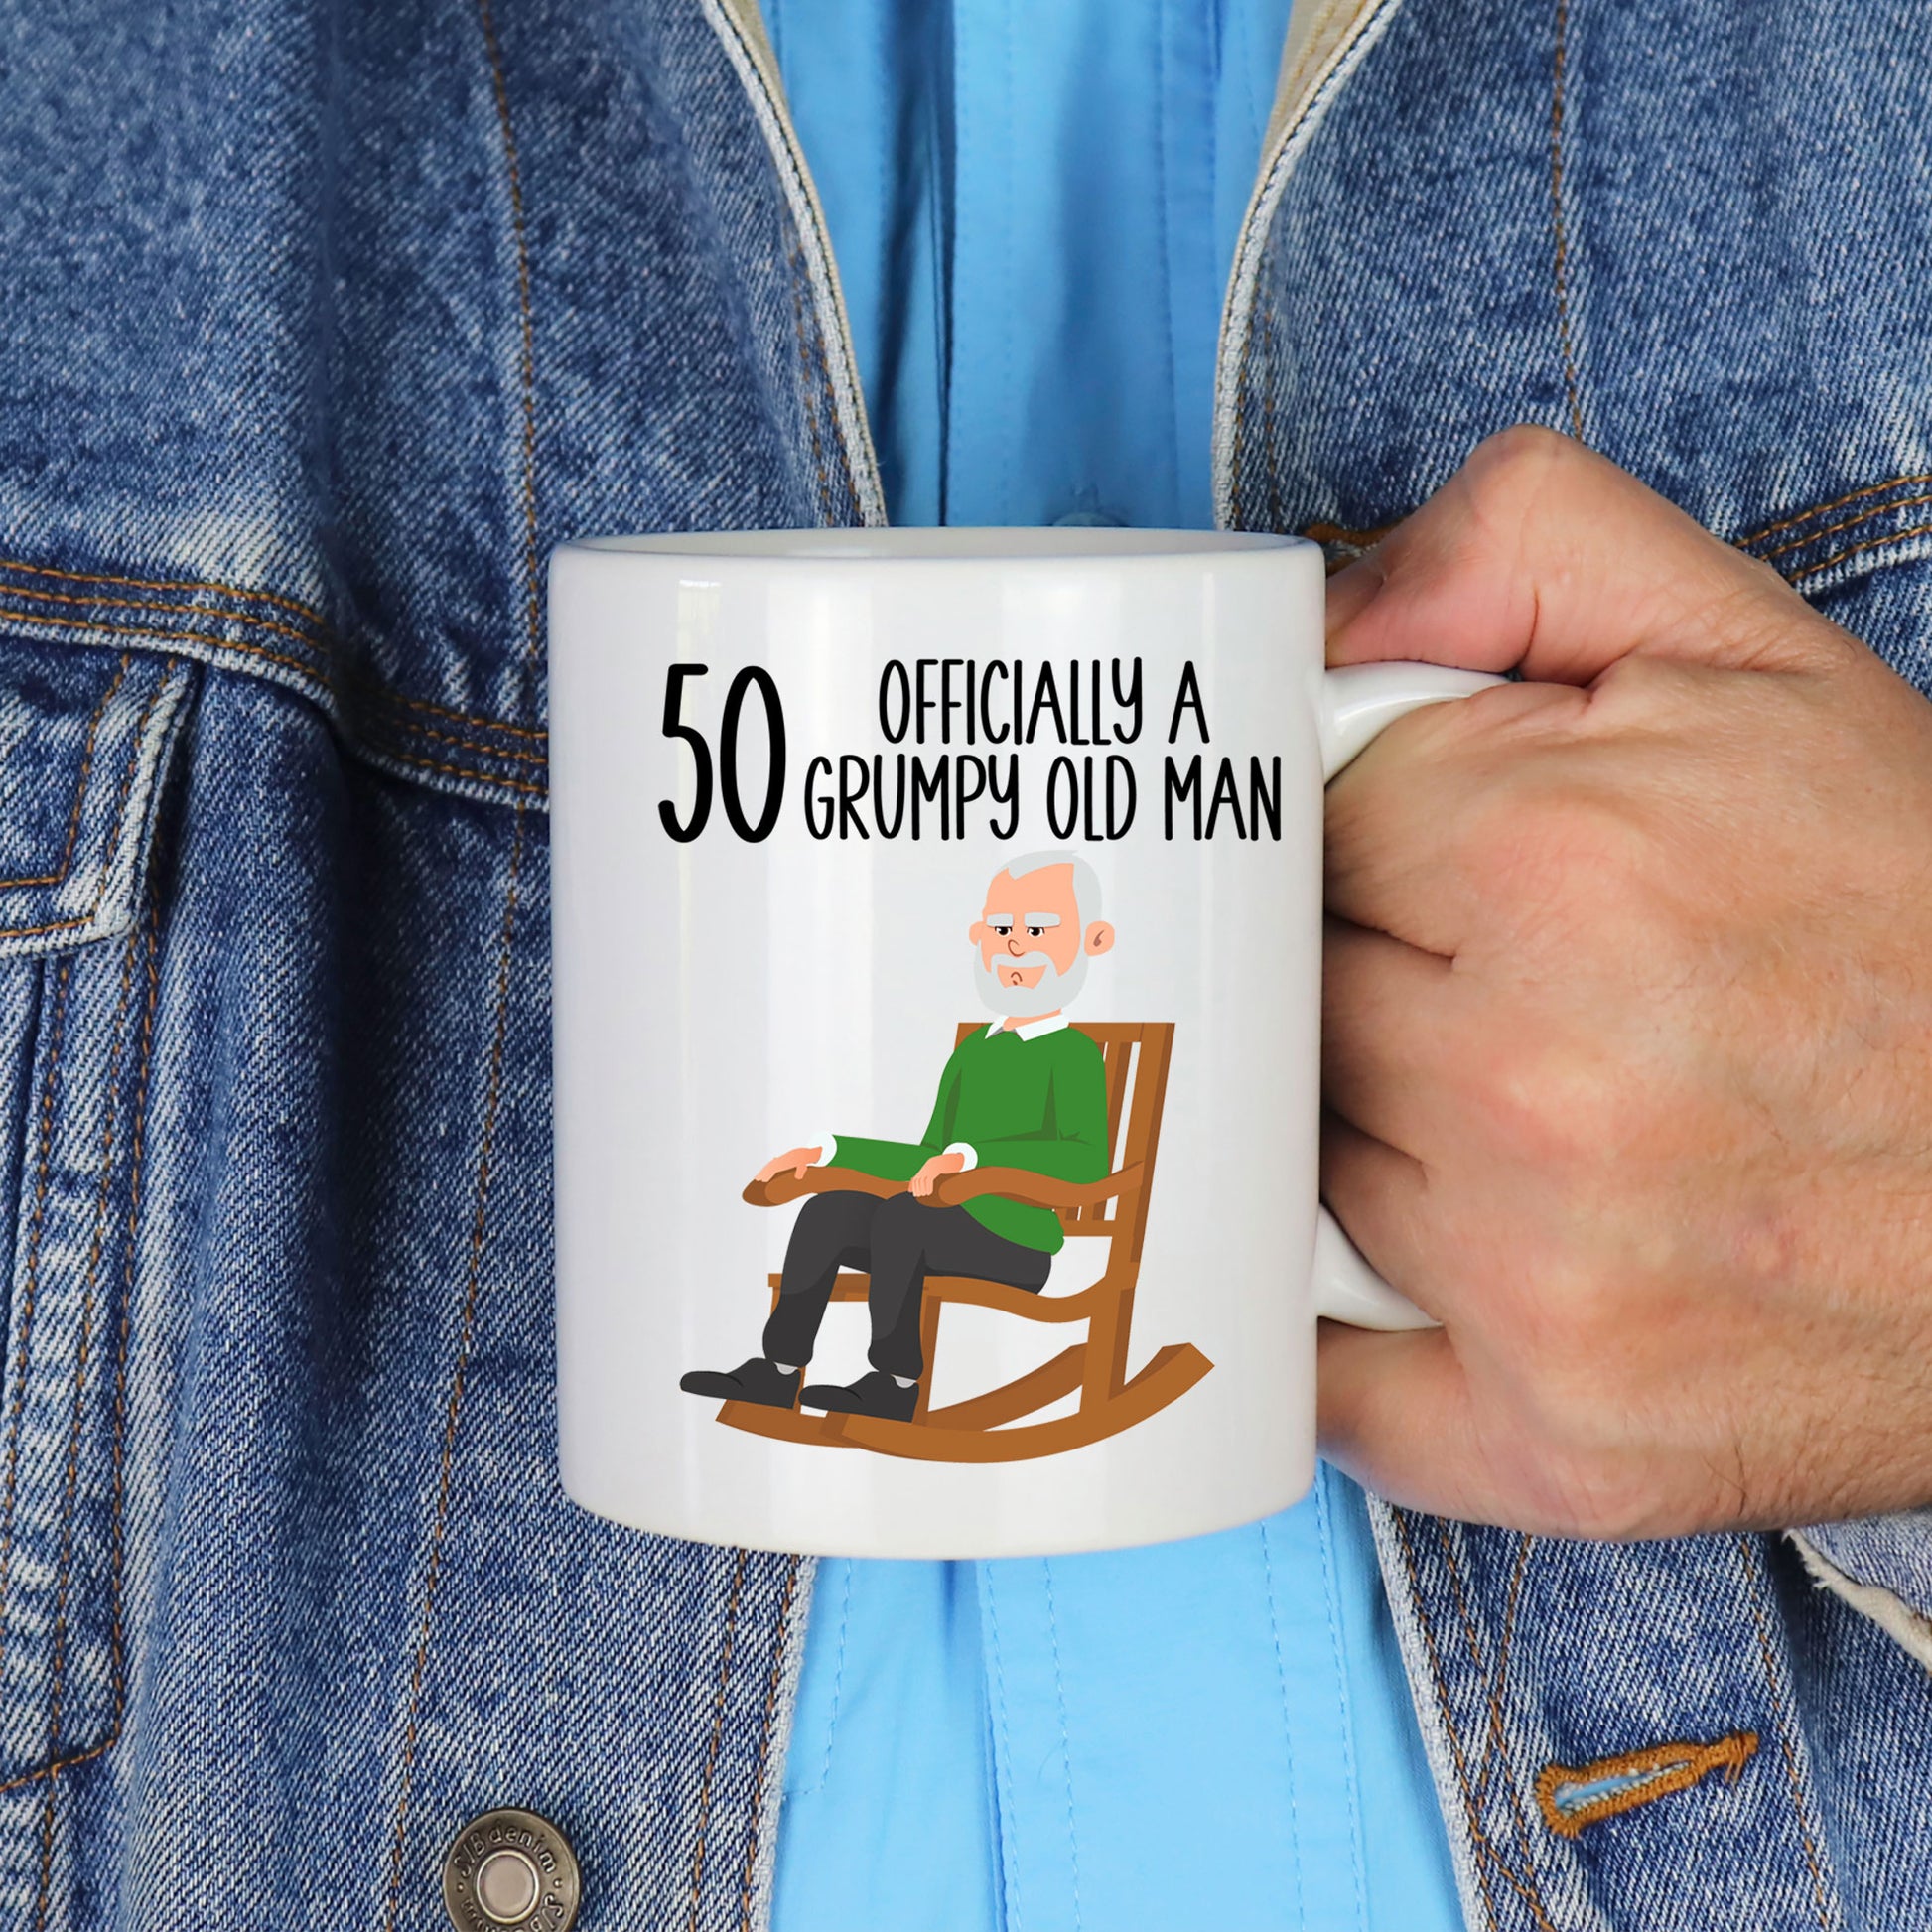 50 Officially A Grumpy Old Man Mug and/or Coaster Gift  - Always Looking Good -   